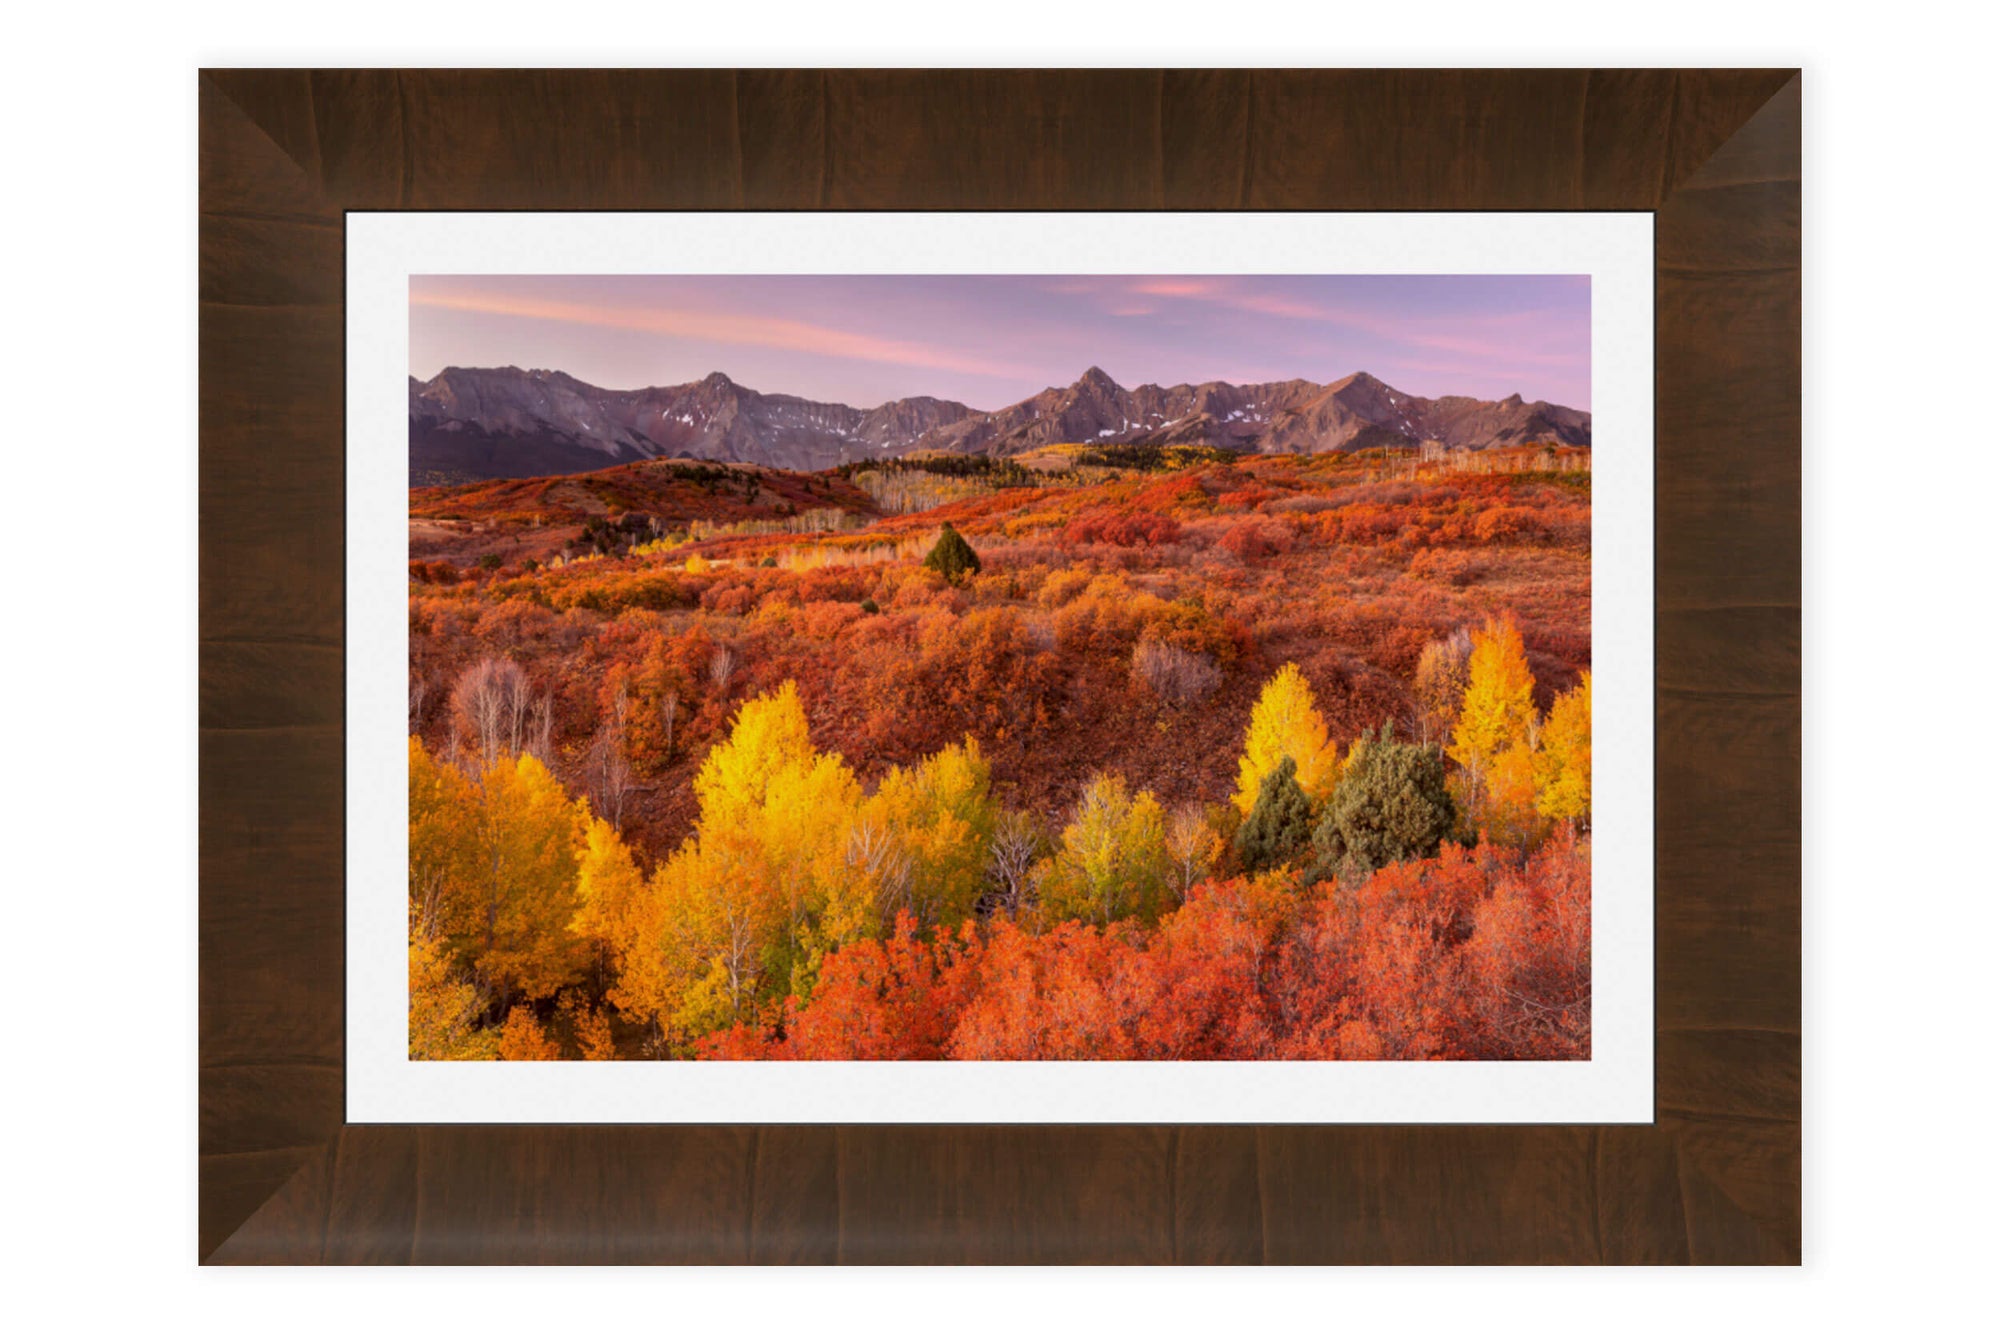 A piece of framed Telluride art shows a Dallas Divide fall colors picture.